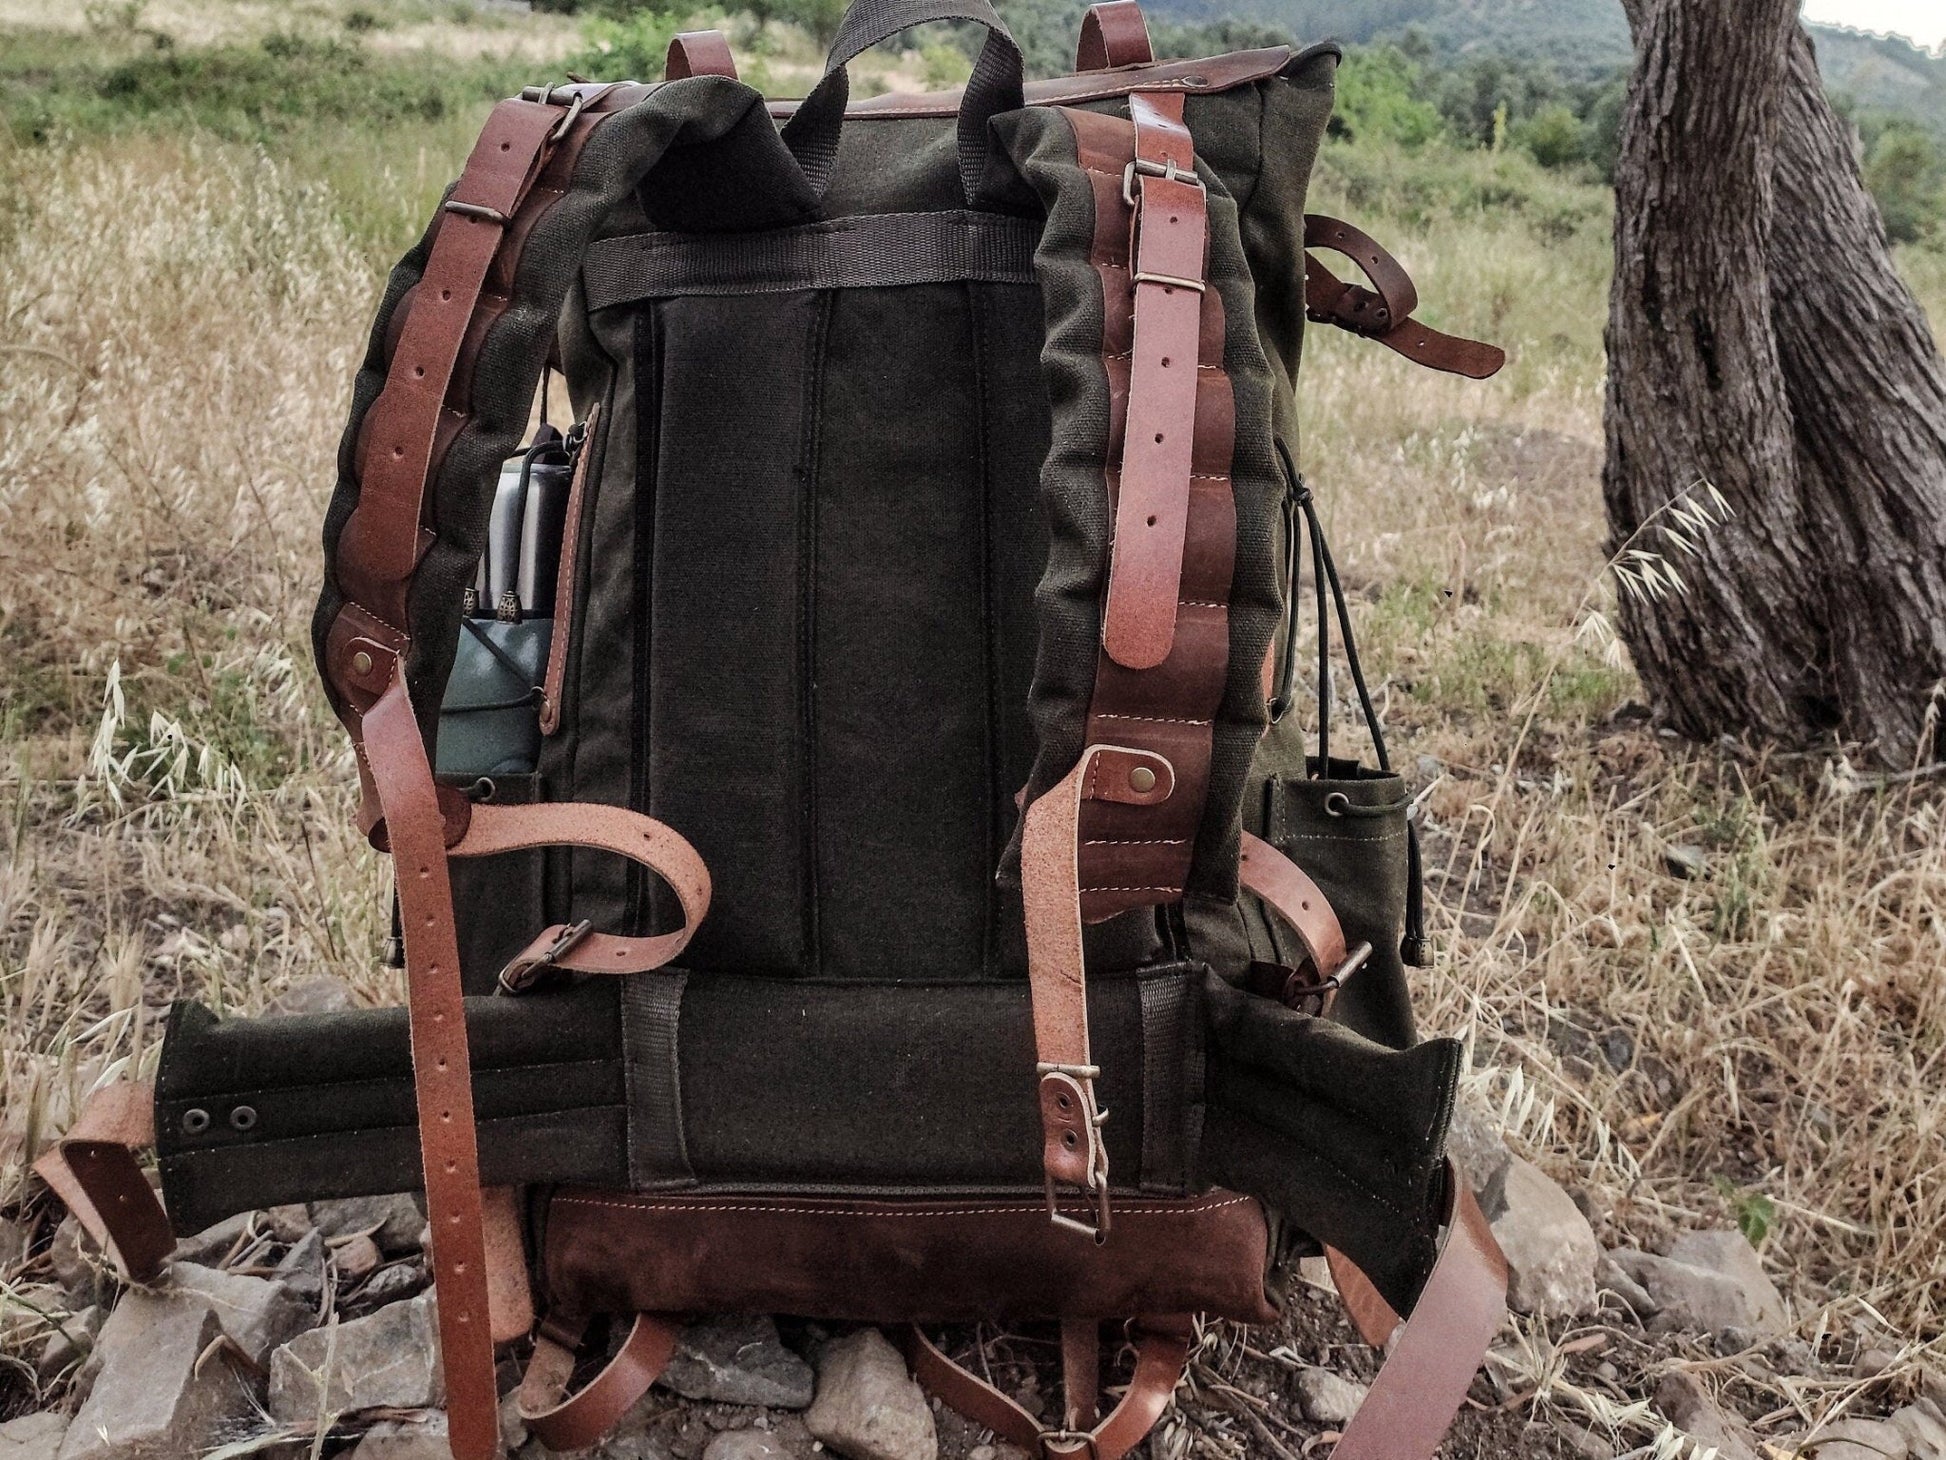 Camping Backpack, 40 Liter to 80 Liter, Camping Backpacks, Hiking backpack Canvas and Leather Backpack with Black-Brown-Green-White options  99percenthandmade   